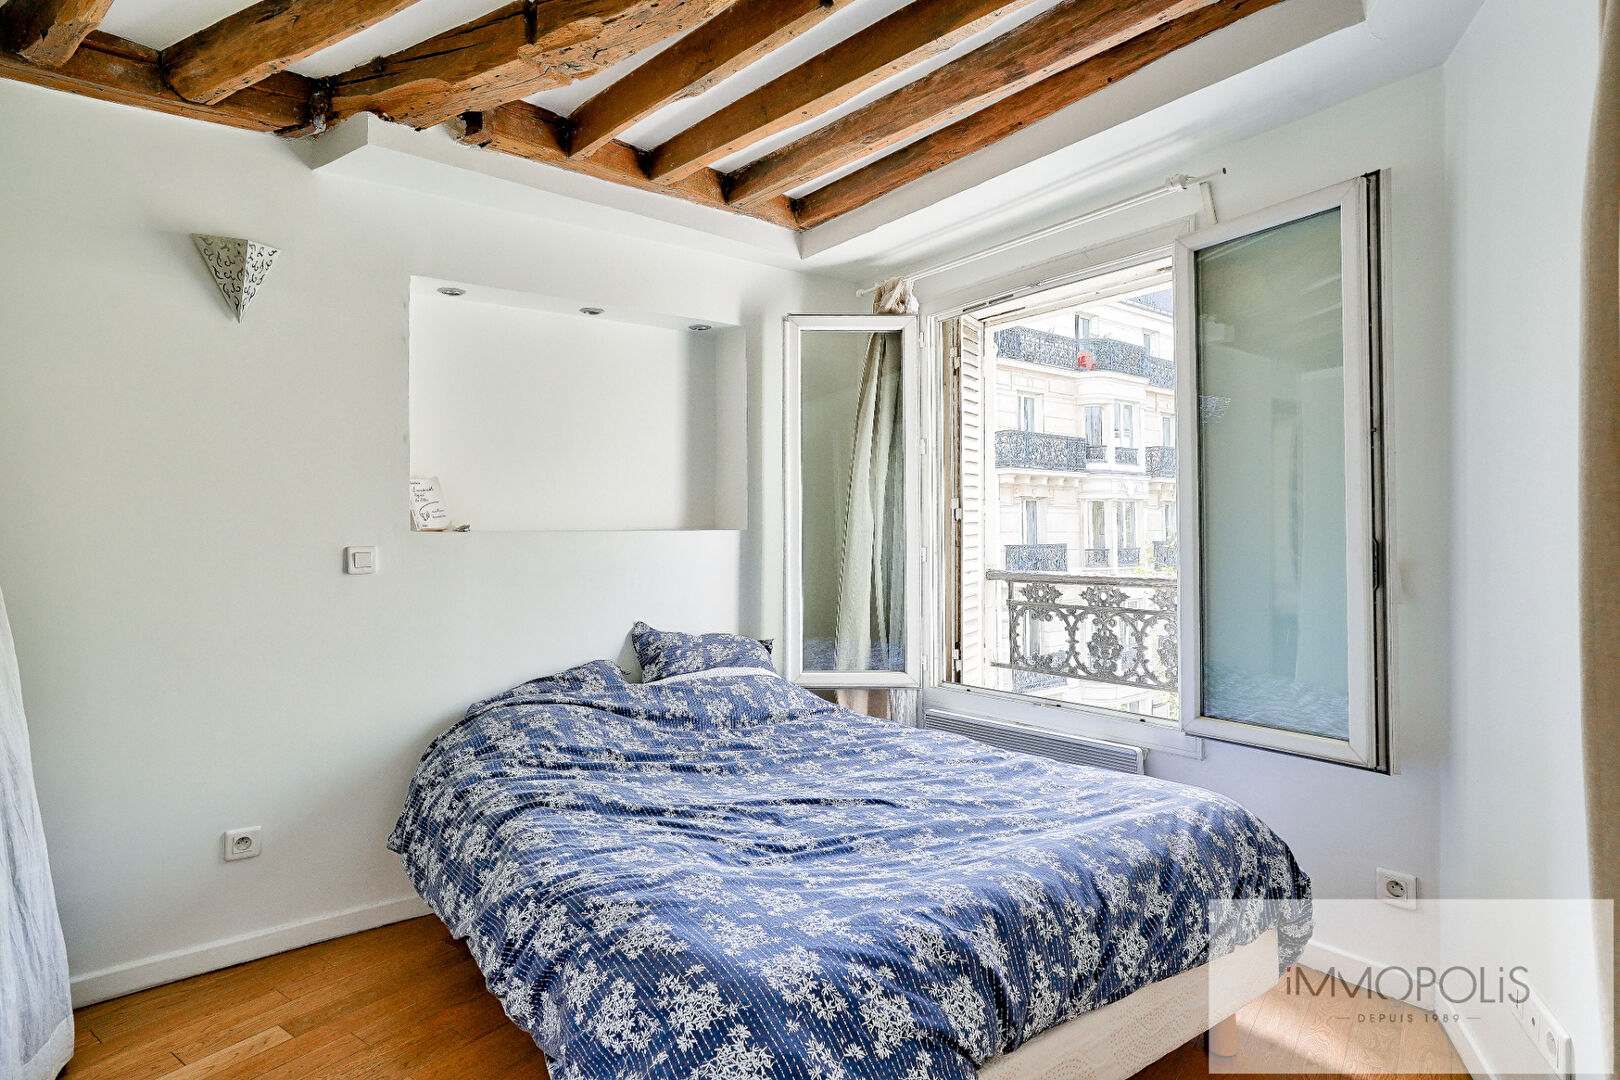 Apartment two rooms of 35m² full of charm 8